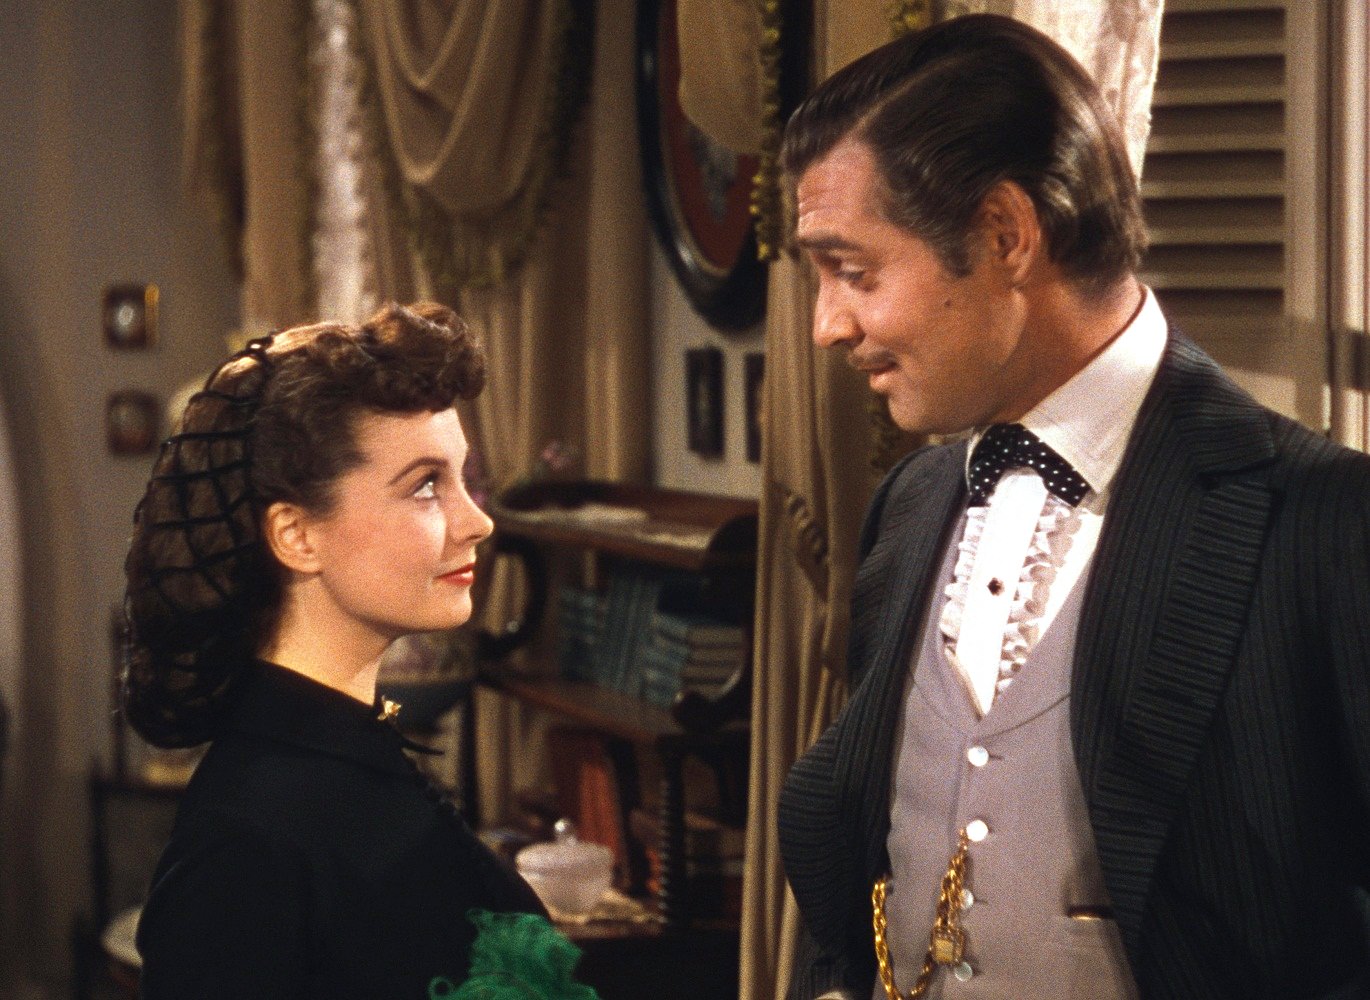 Vivien Leigh and Clark Gable in Gone with the wind, 1939.